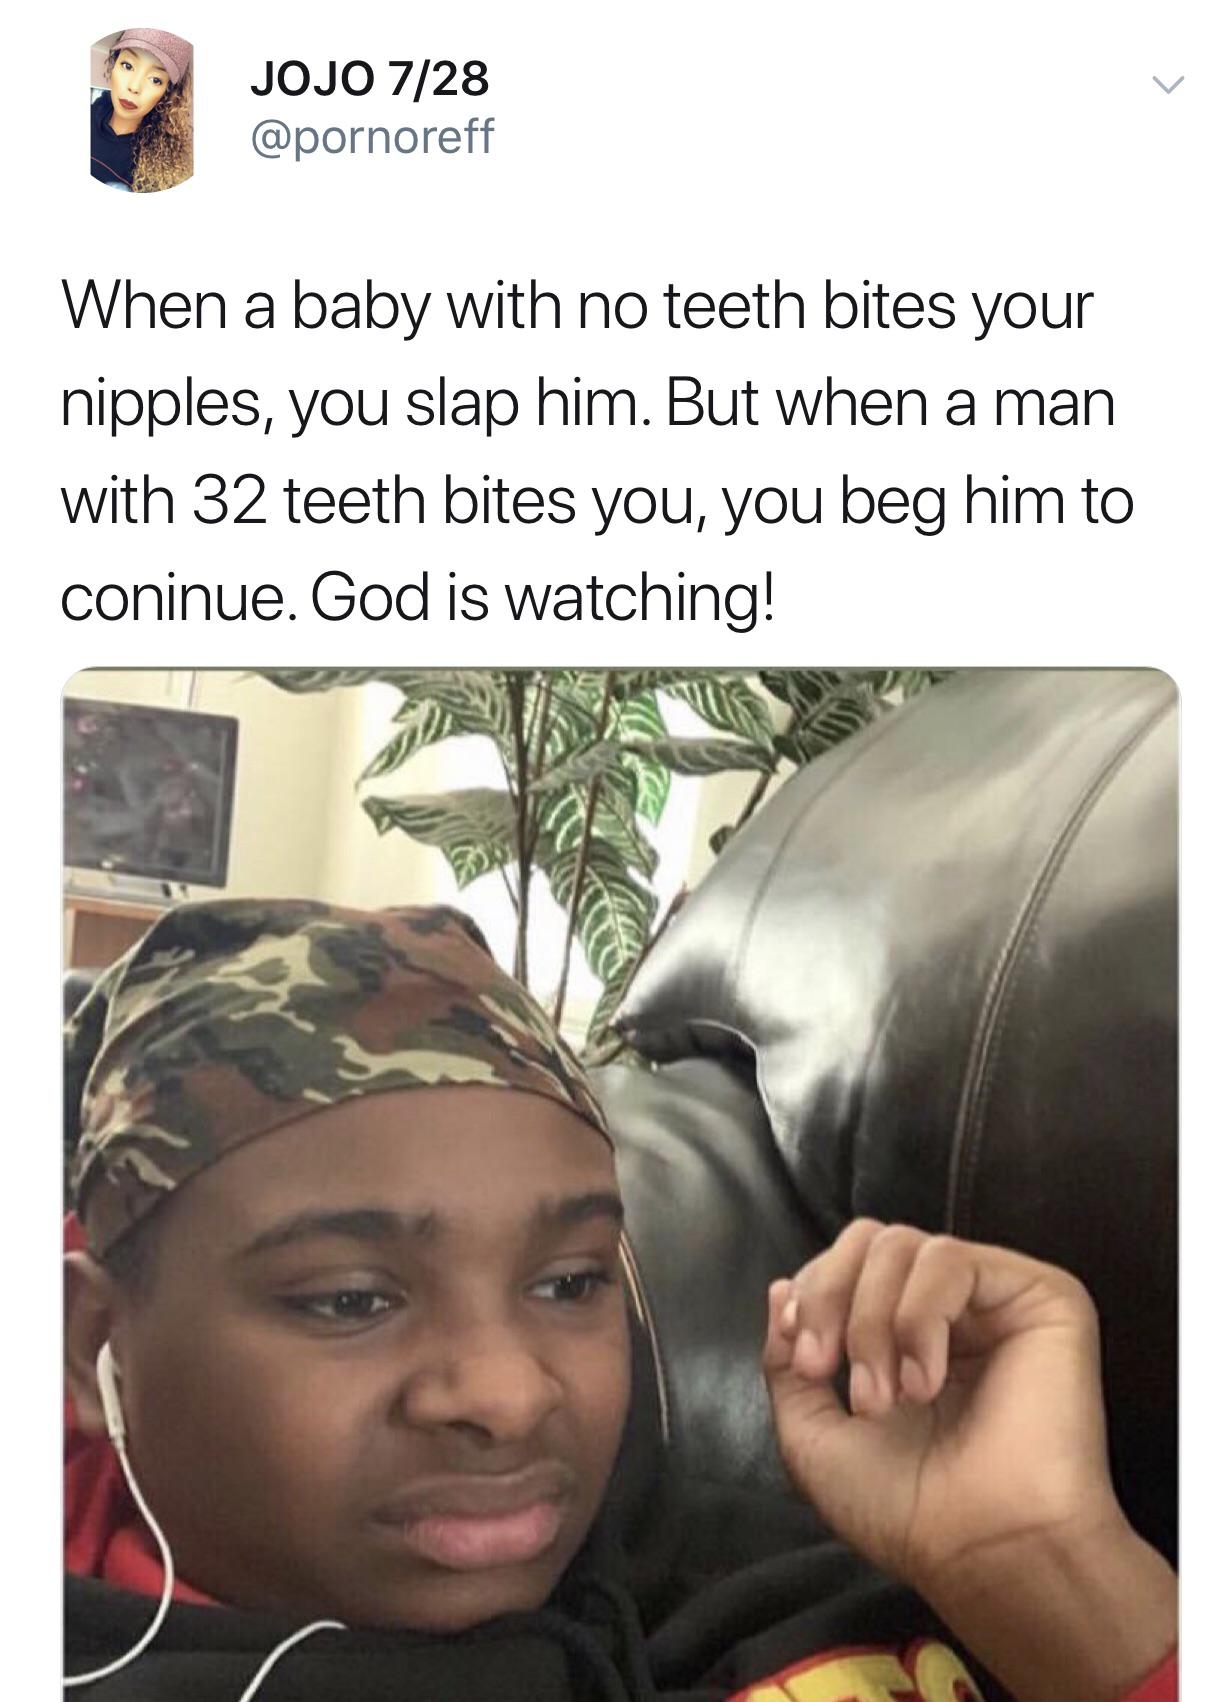 bitches will have an std and still call themselves a snack - Jojo 728 When a baby with no teeth bites your nipples, you slap him. But when a man with 32 teeth bites you, you beg him to coninue. God is watching!